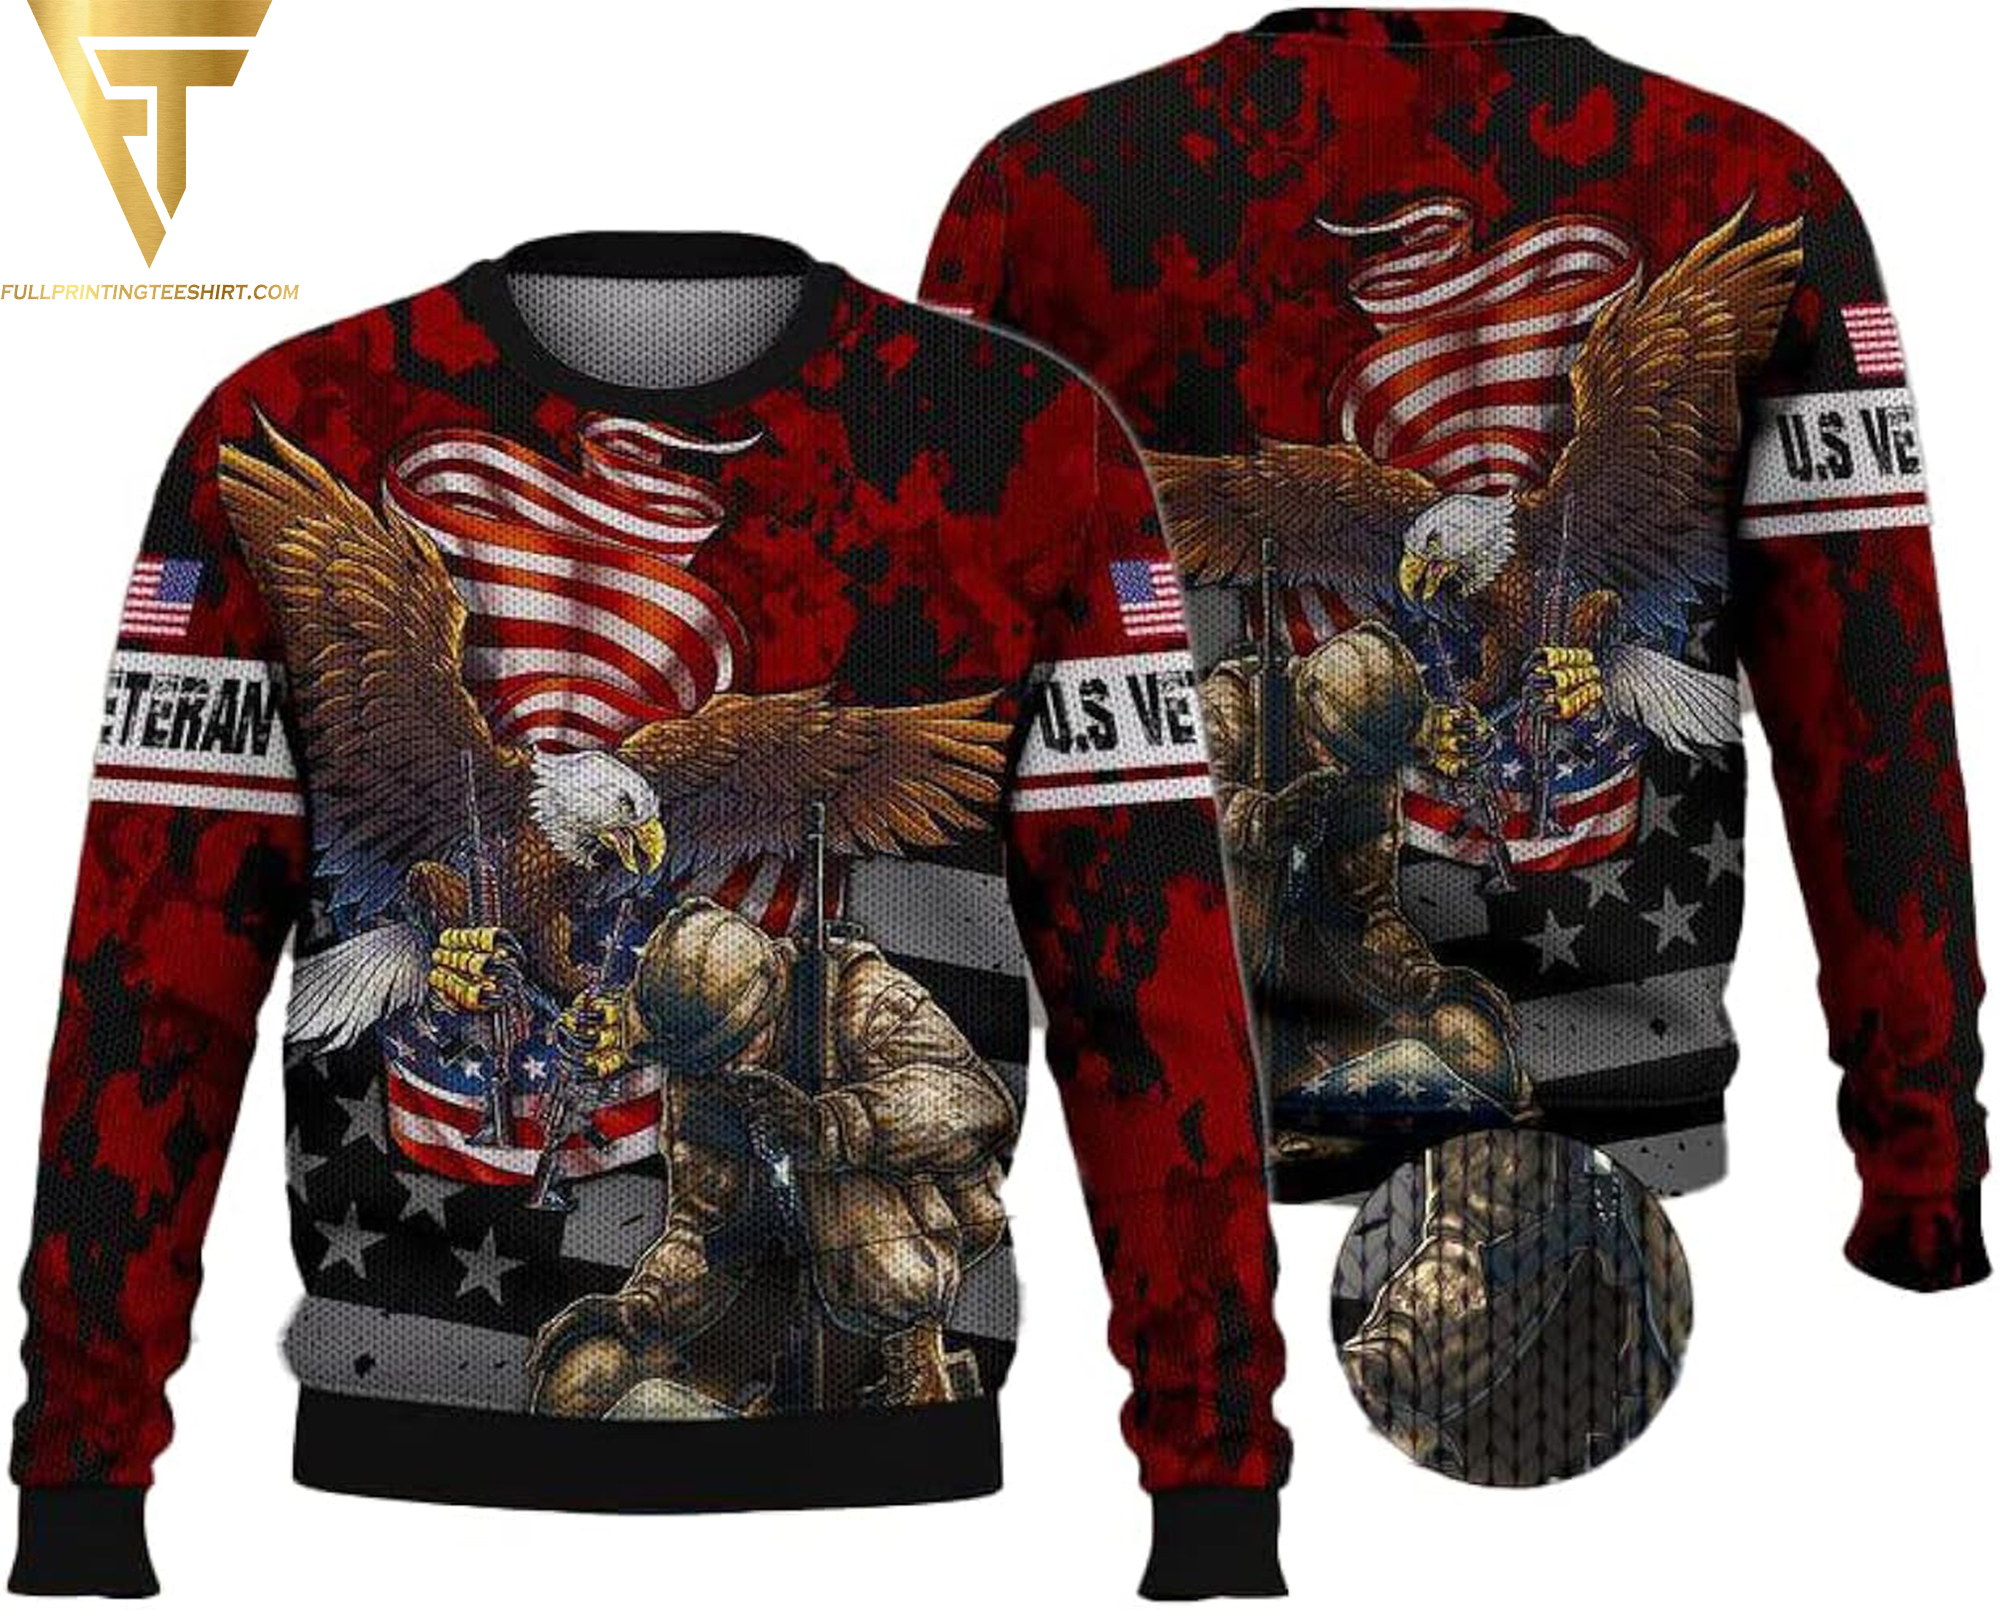 Dress to Impress The American Flag Sweater – A Cool Outfit for This Christmas